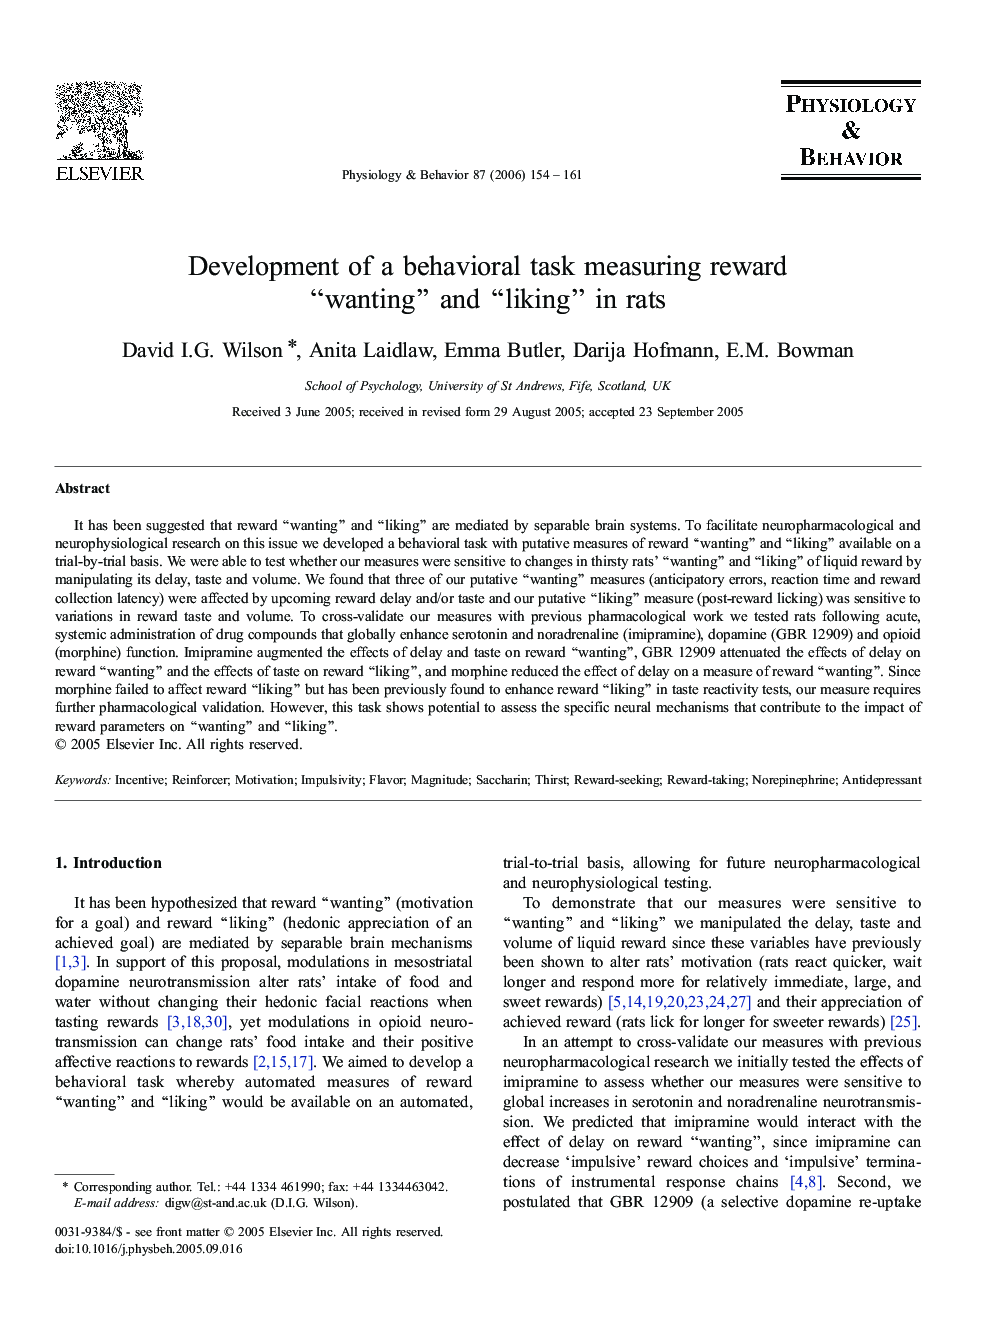 Development of a behavioral task measuring reward “wanting” and “liking” in rats